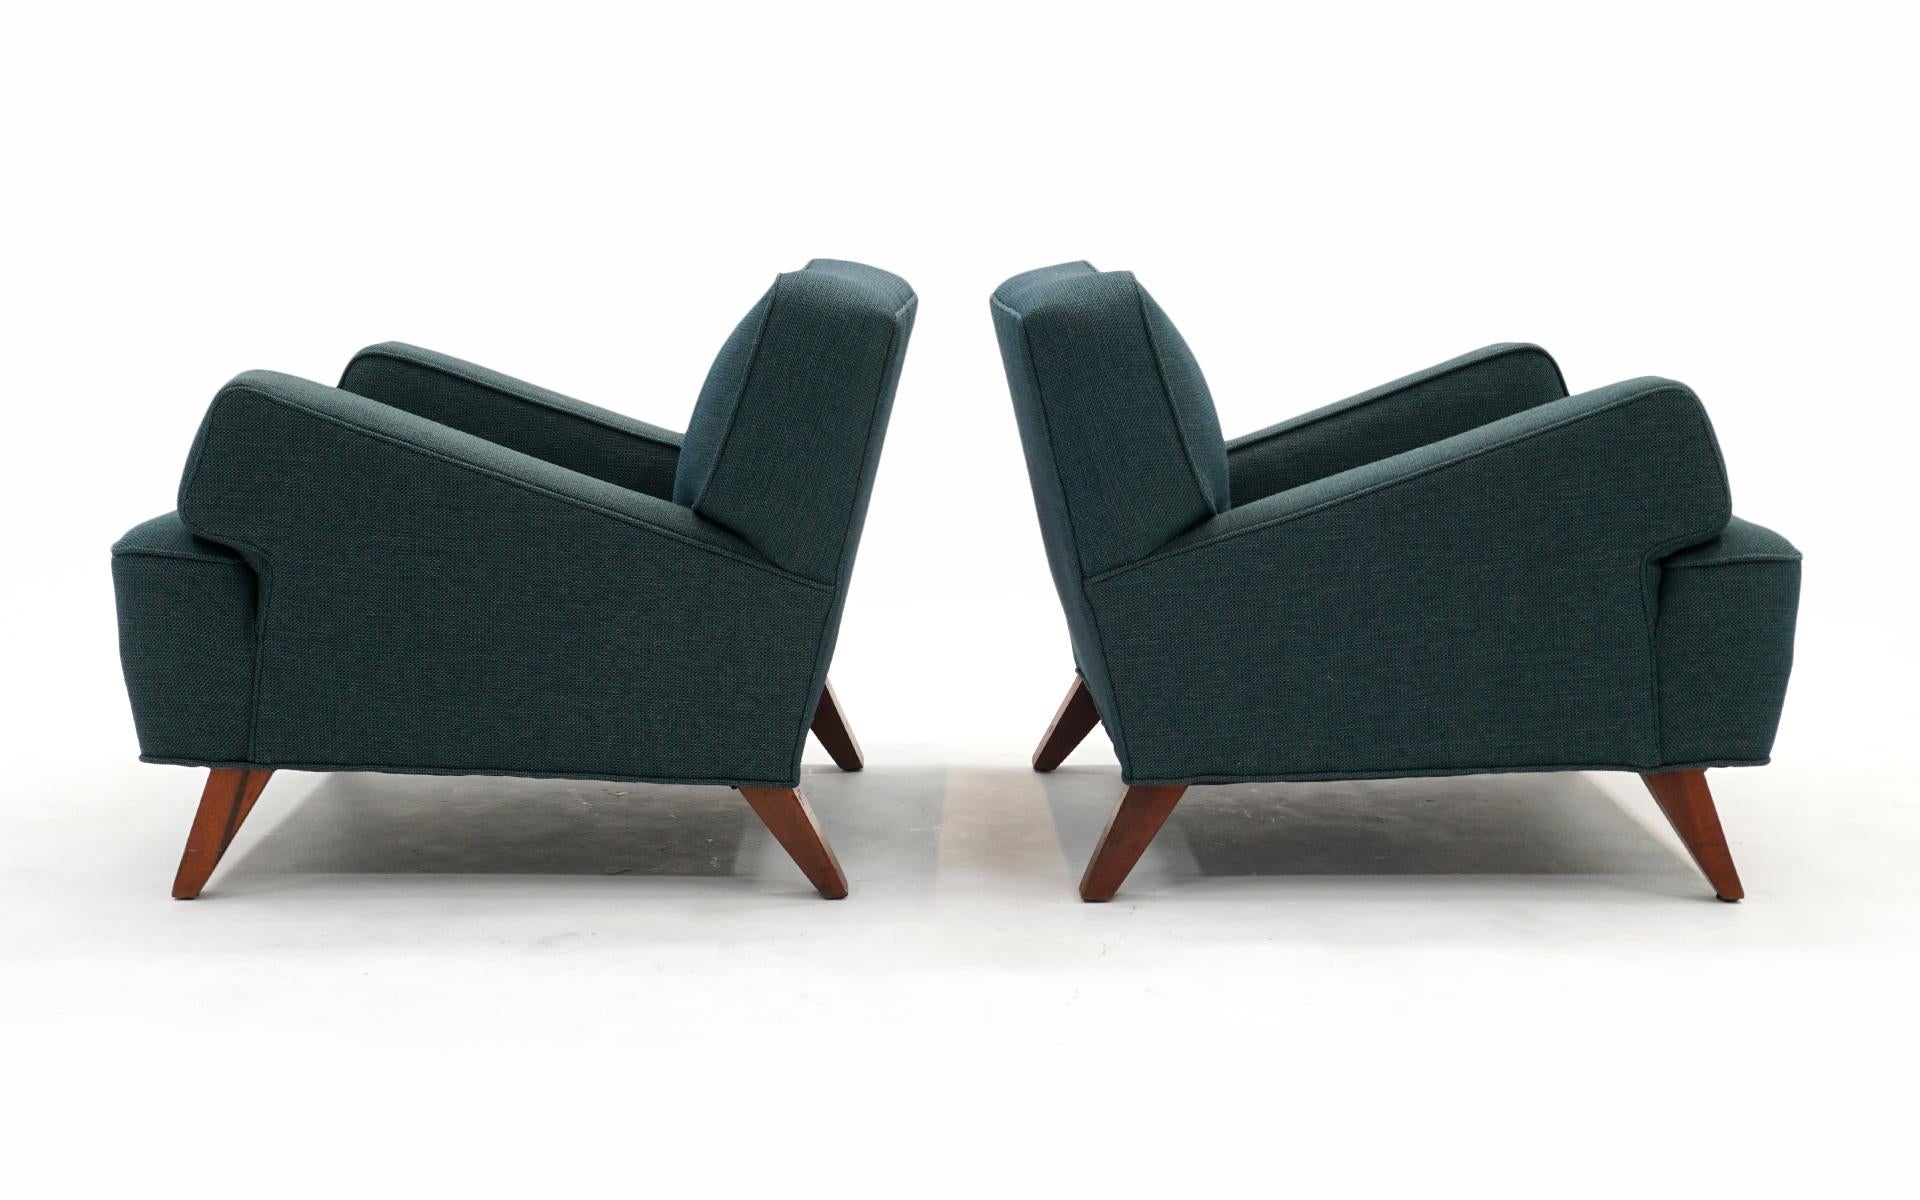 Upholstery Pair Lounge Chairs by Jens Risom, Original, Early, Rare Angled Arm Design